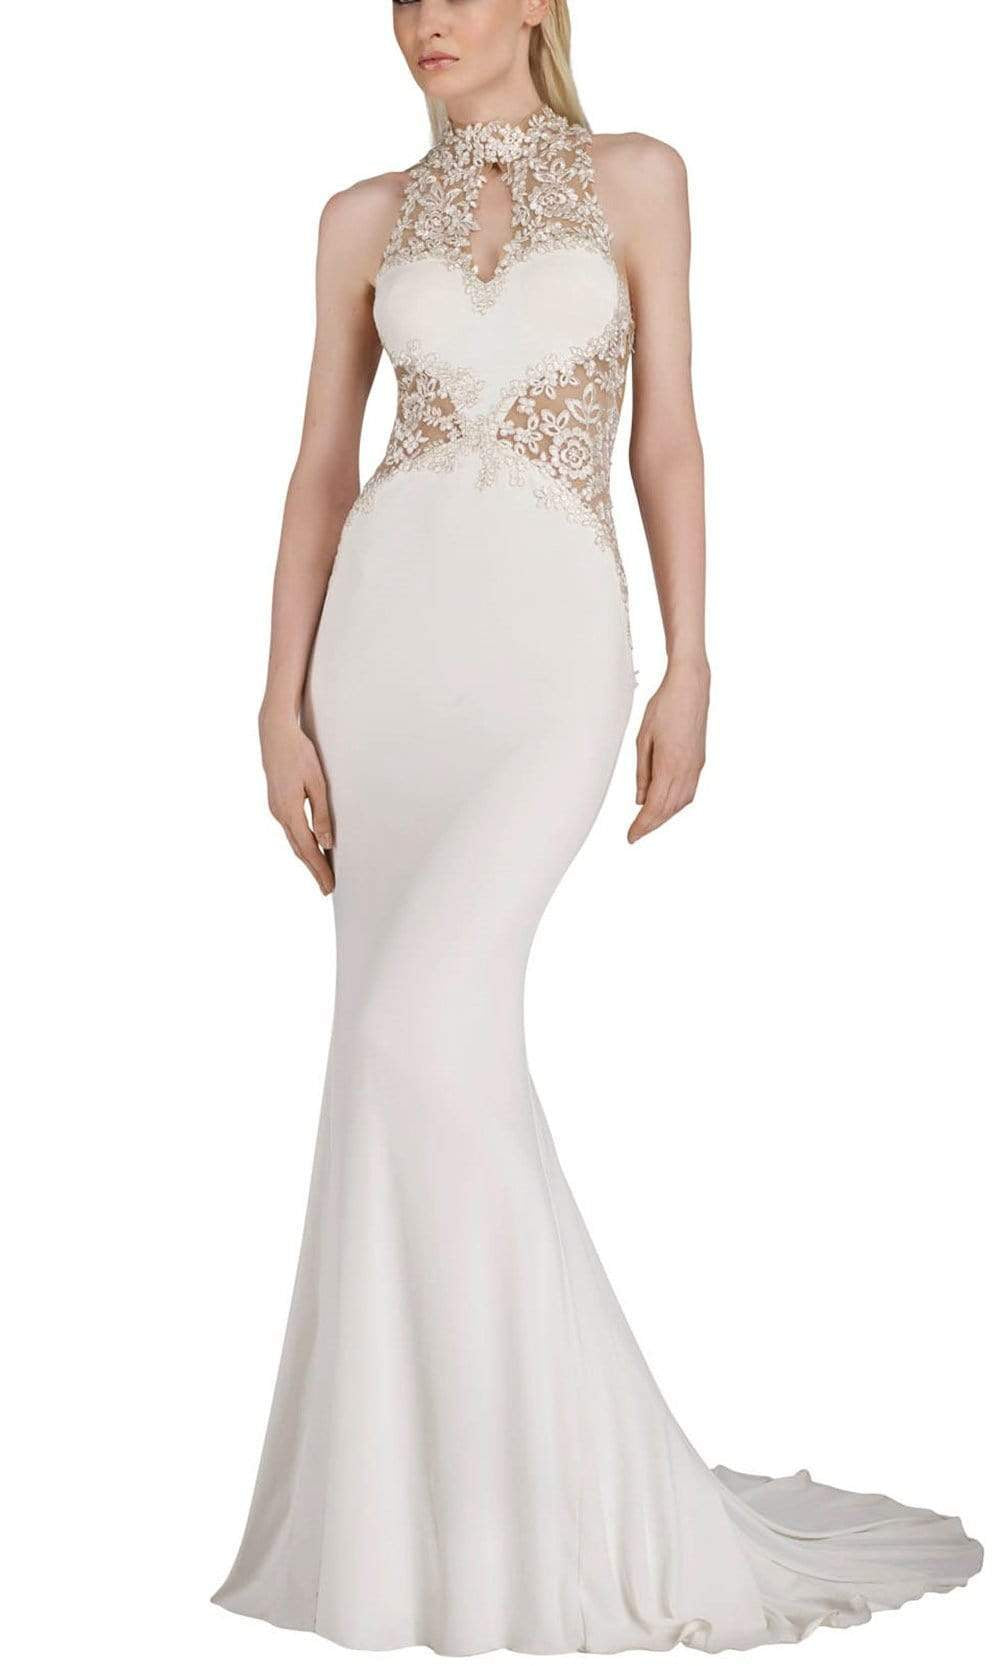 Janique - W974 Jersey Gown in Ivory Special Occasion Dress 0 / Ivory